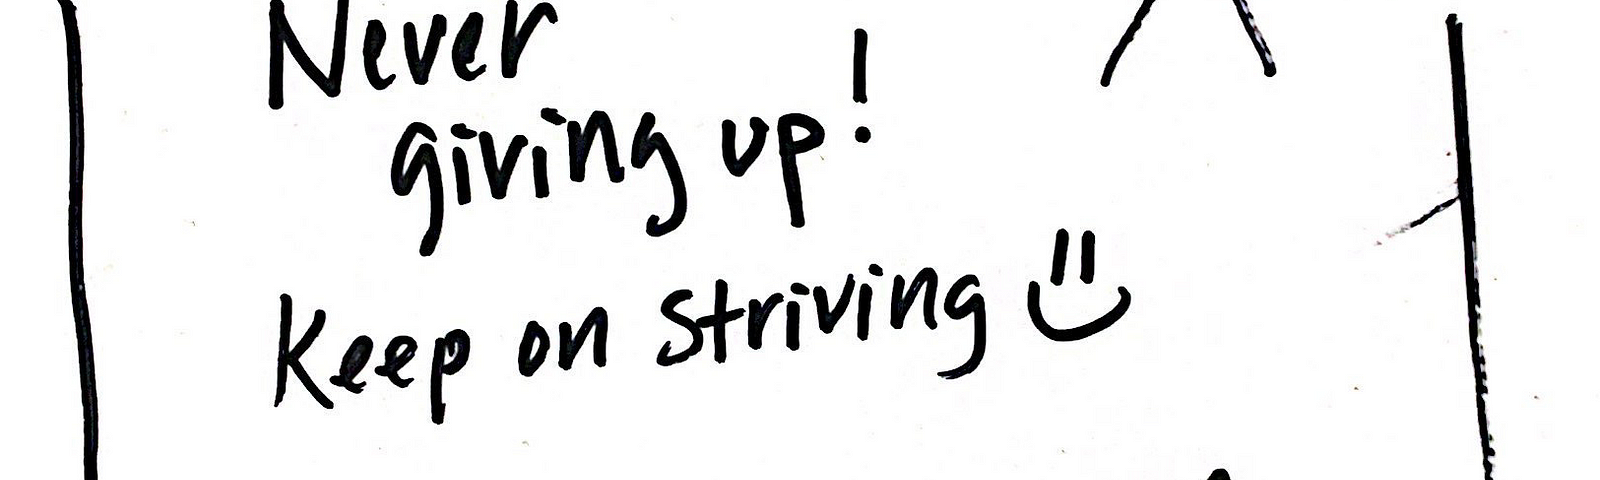 Never giving up! Keep on striving [smiley face] Making my mom and dad proud of what they have sacrificed. [heart]